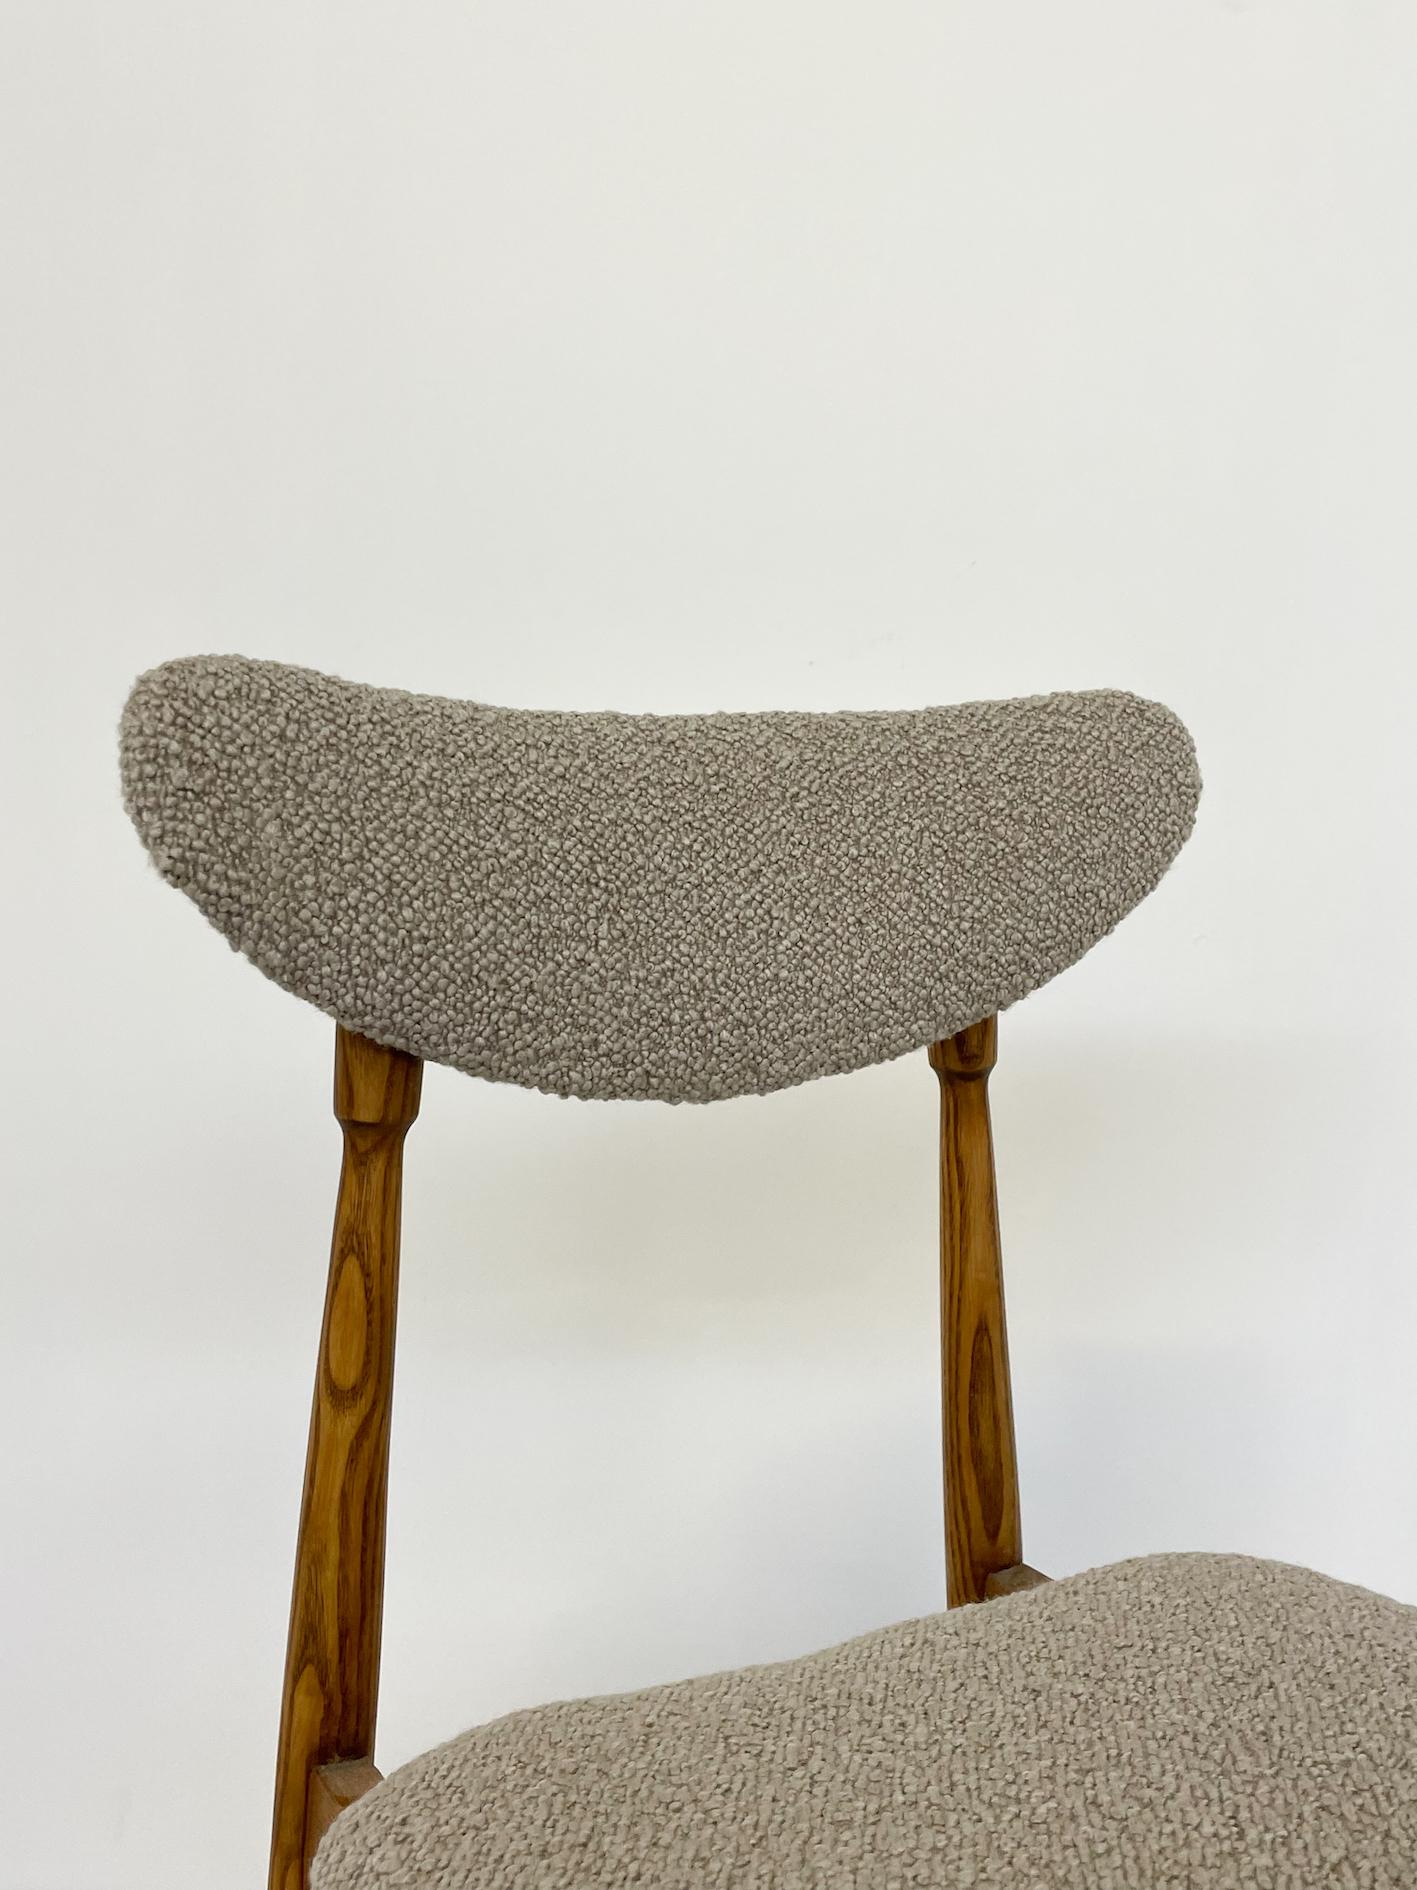 The Modernity Set of 12 Chairs, Italie, 1960s - New Upholstery en vente 1